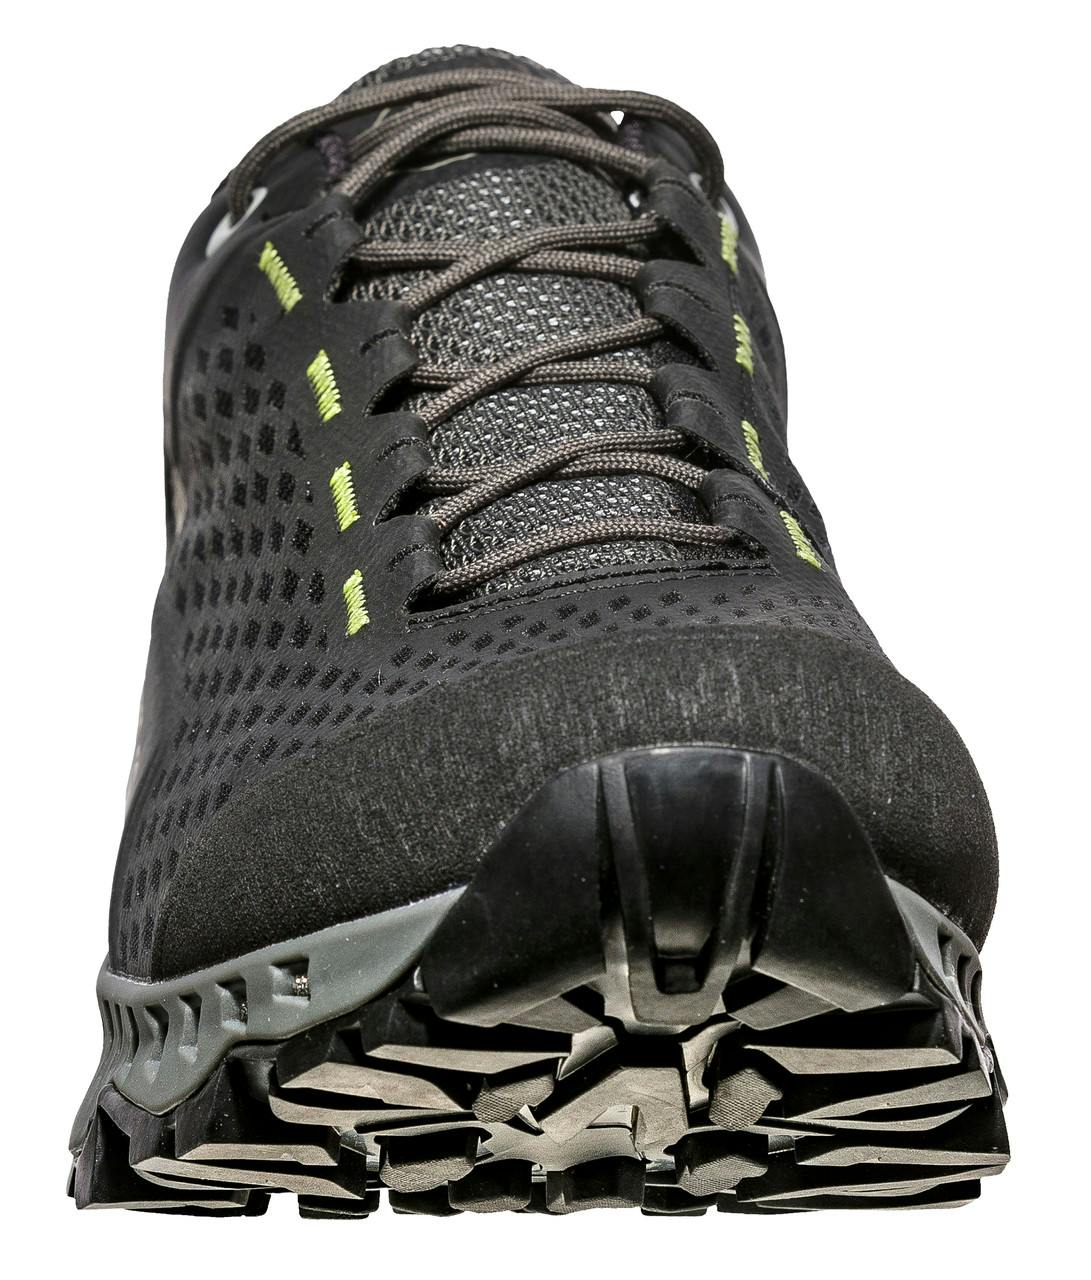 Spire Gore-Tex Surround Light Trail Shoes Carbon/Apple Green